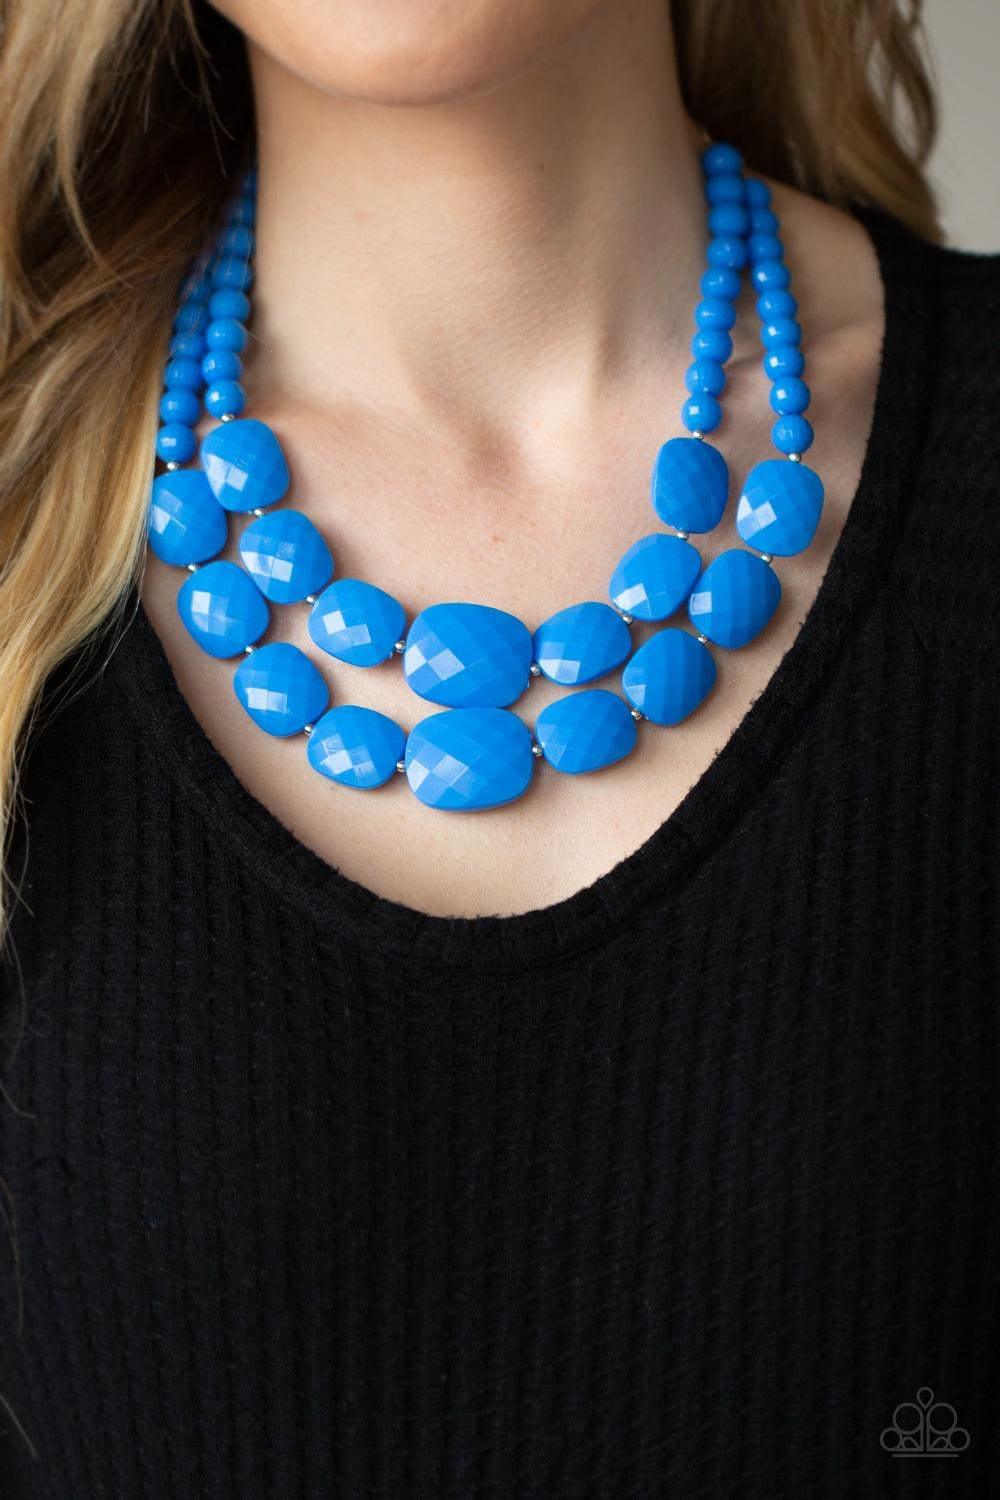 Paparazzi Accessories - Resort Ready - Blue Necklace - Bling by JessieK